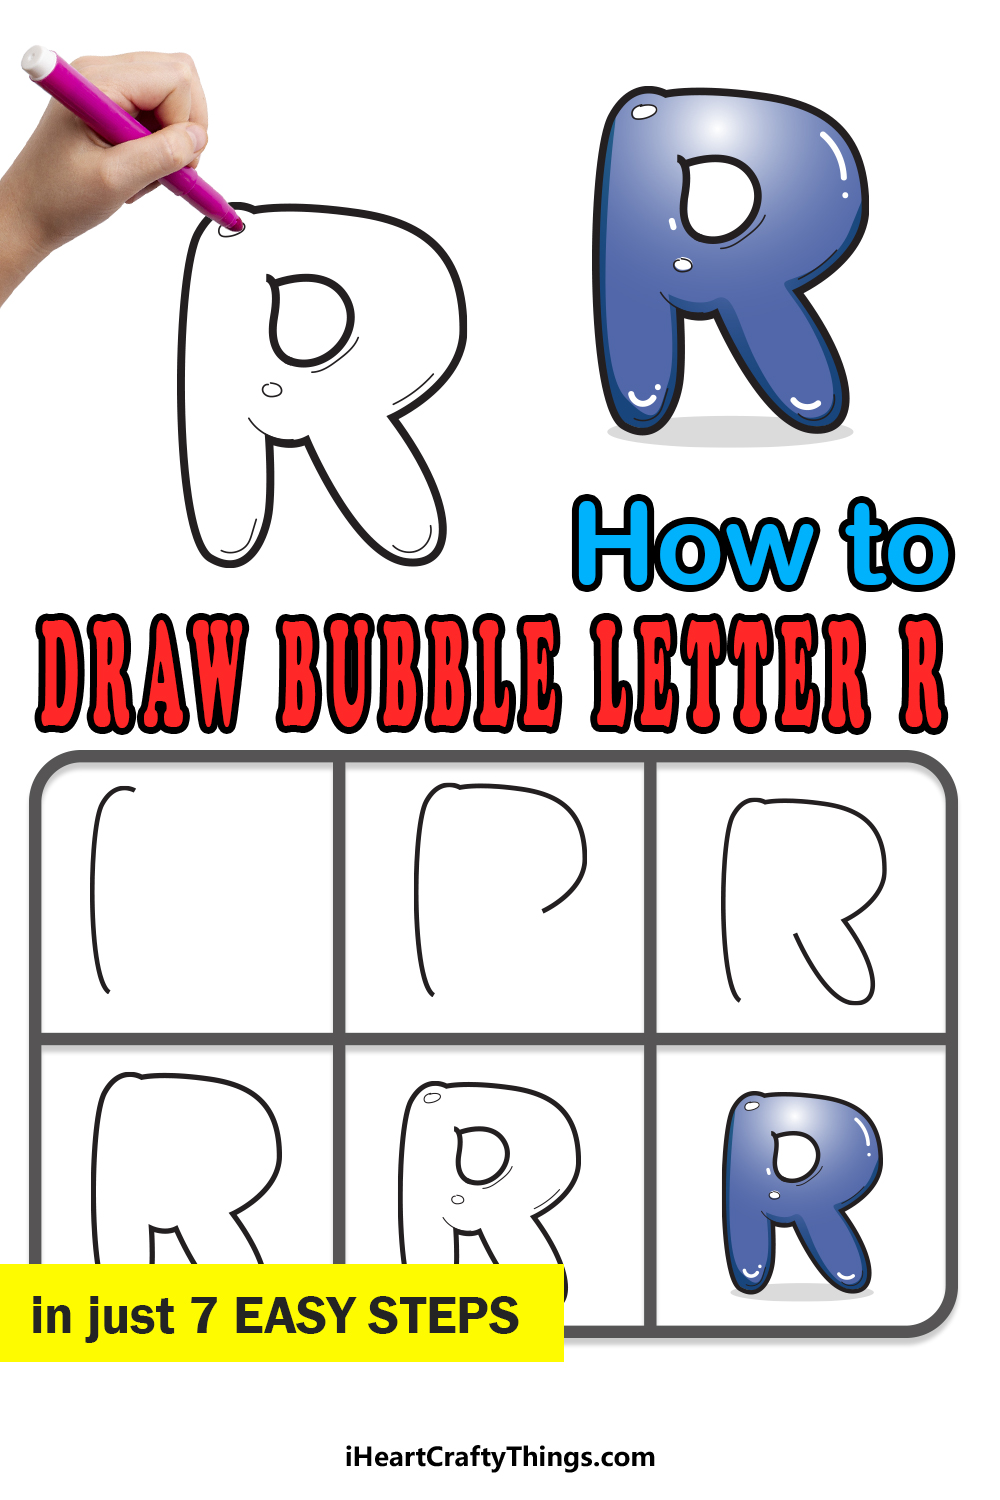 How To Draw Your Own Bubble R step by step guide